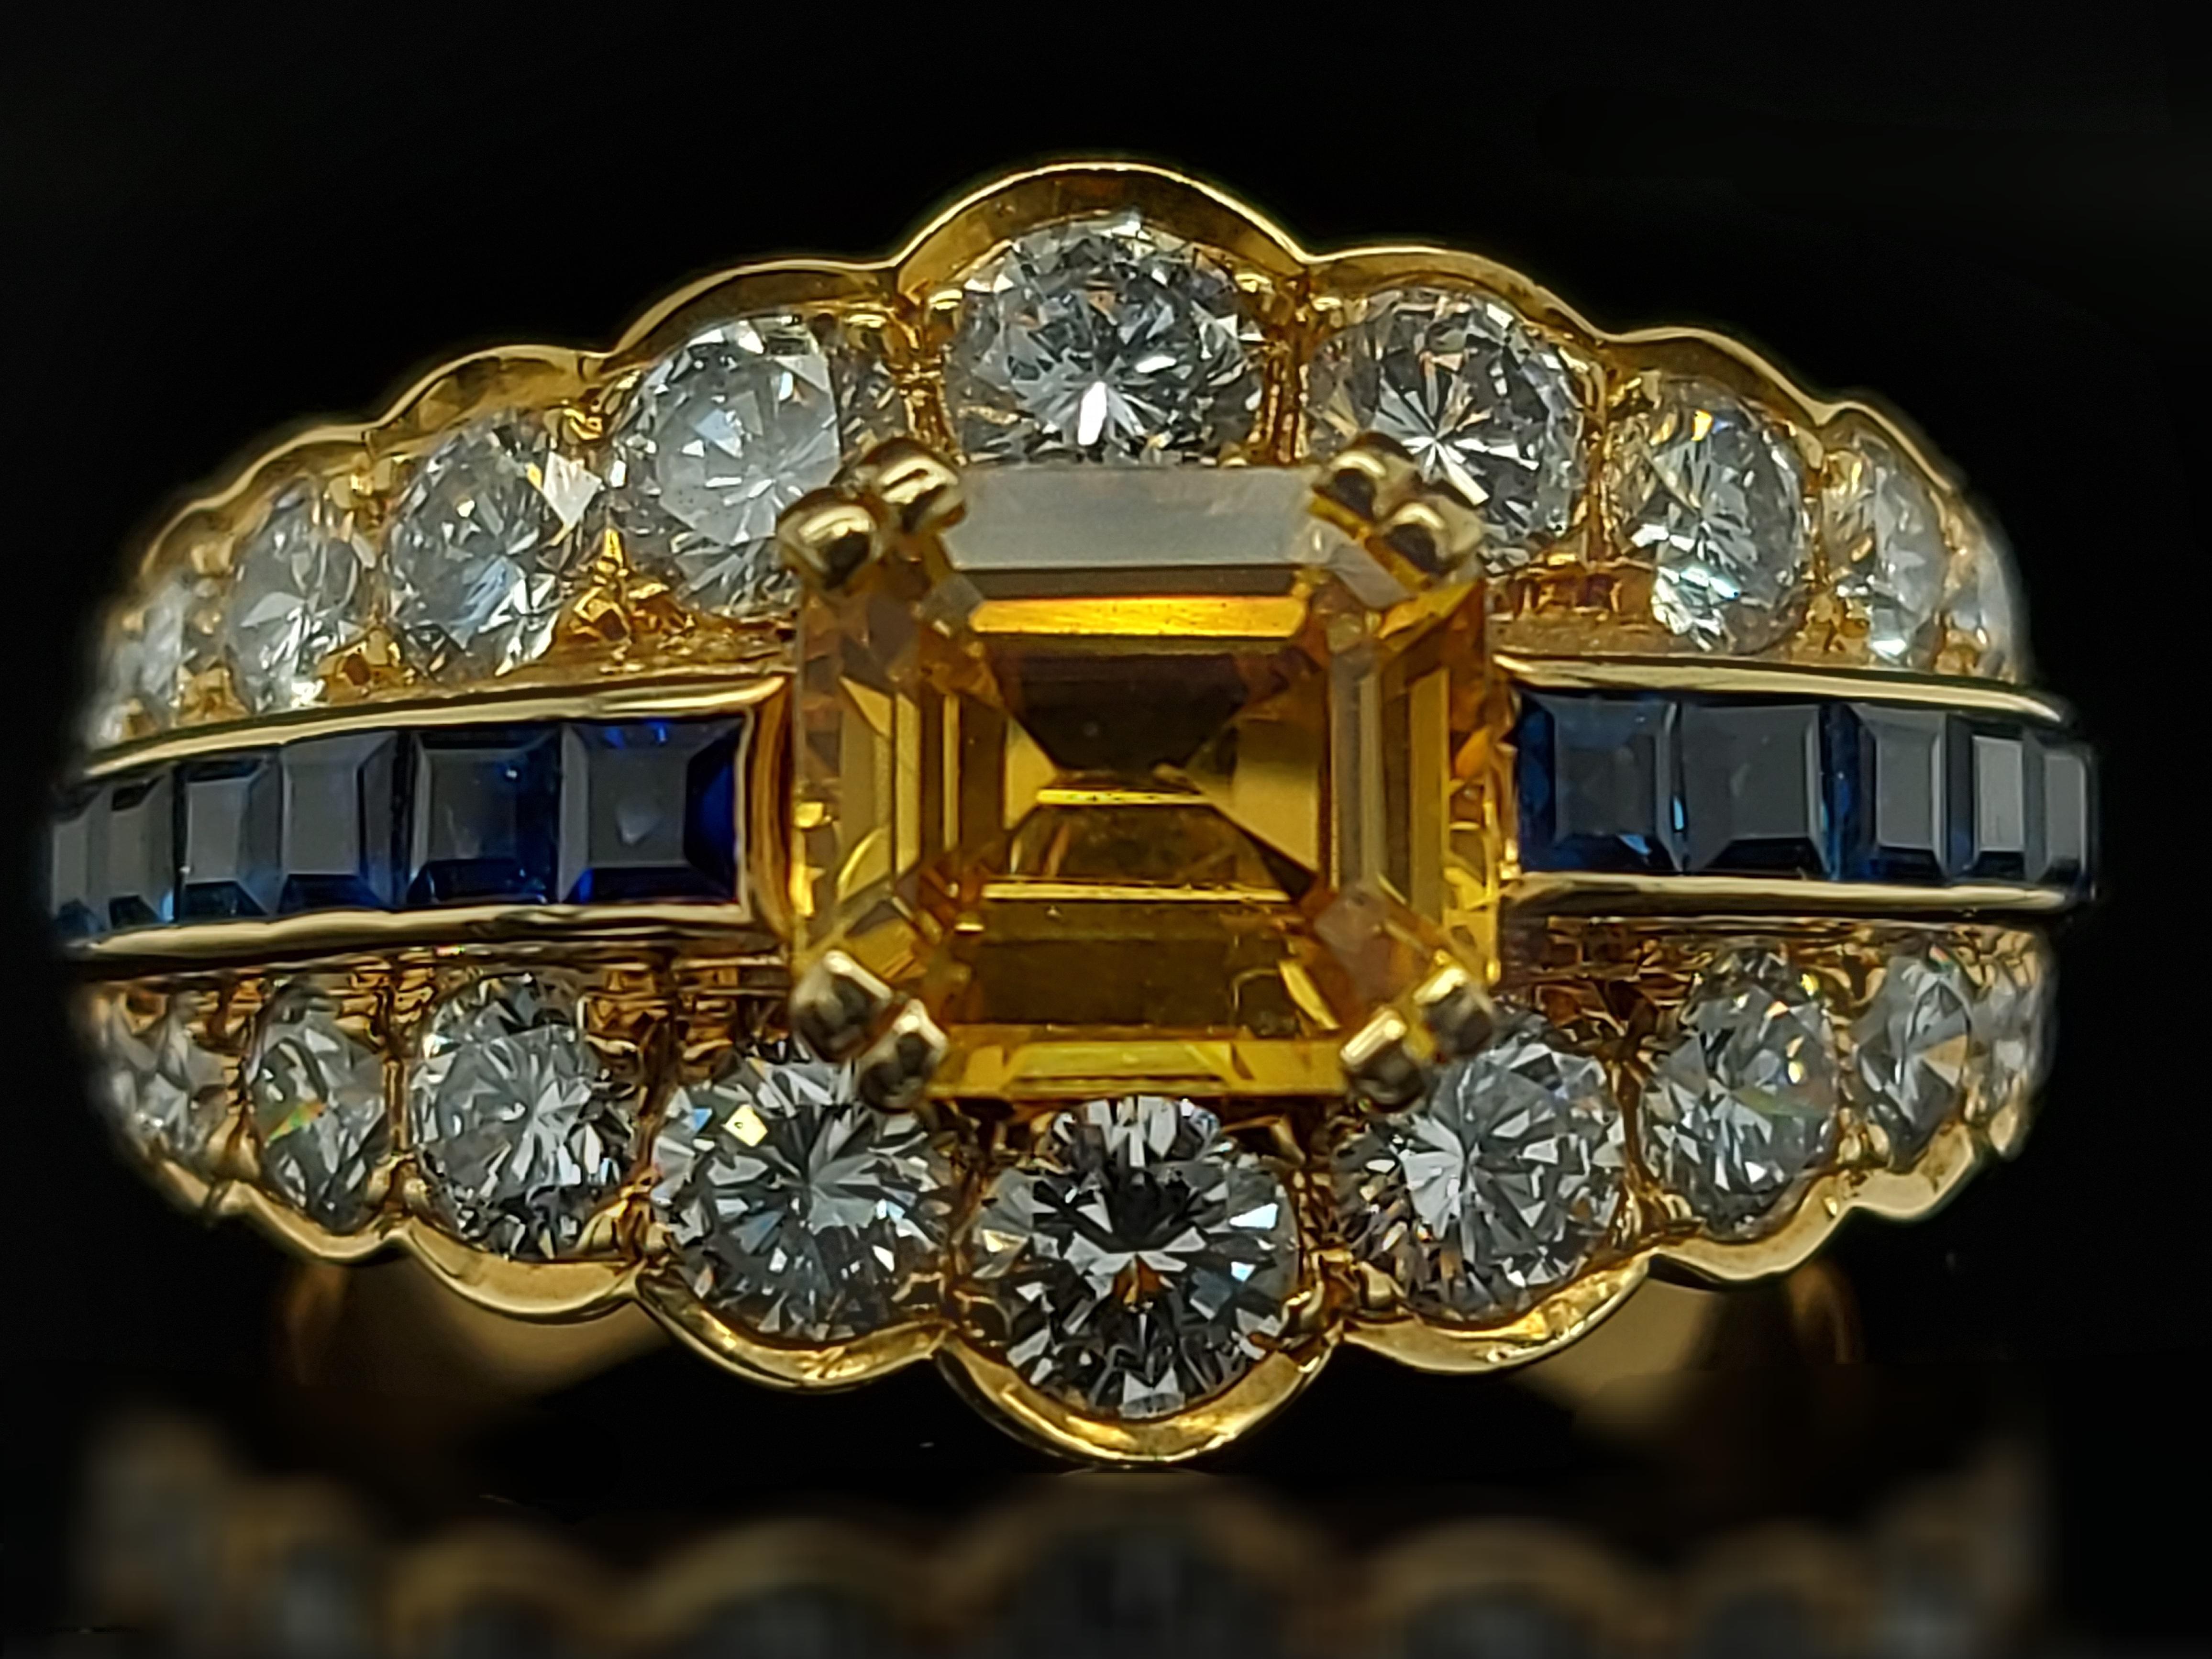 Magnificent 18kt Yellow Gold Ring With Large Yellow Sapphire, Blue Sapphires and Diamonds.

Sapphire: 12 small princess cut blue sapphires and large emerald cut yellow sapphire ca. 1.50 cts

Diamonds: 24 brilliant cut diamonds (together ca. 2